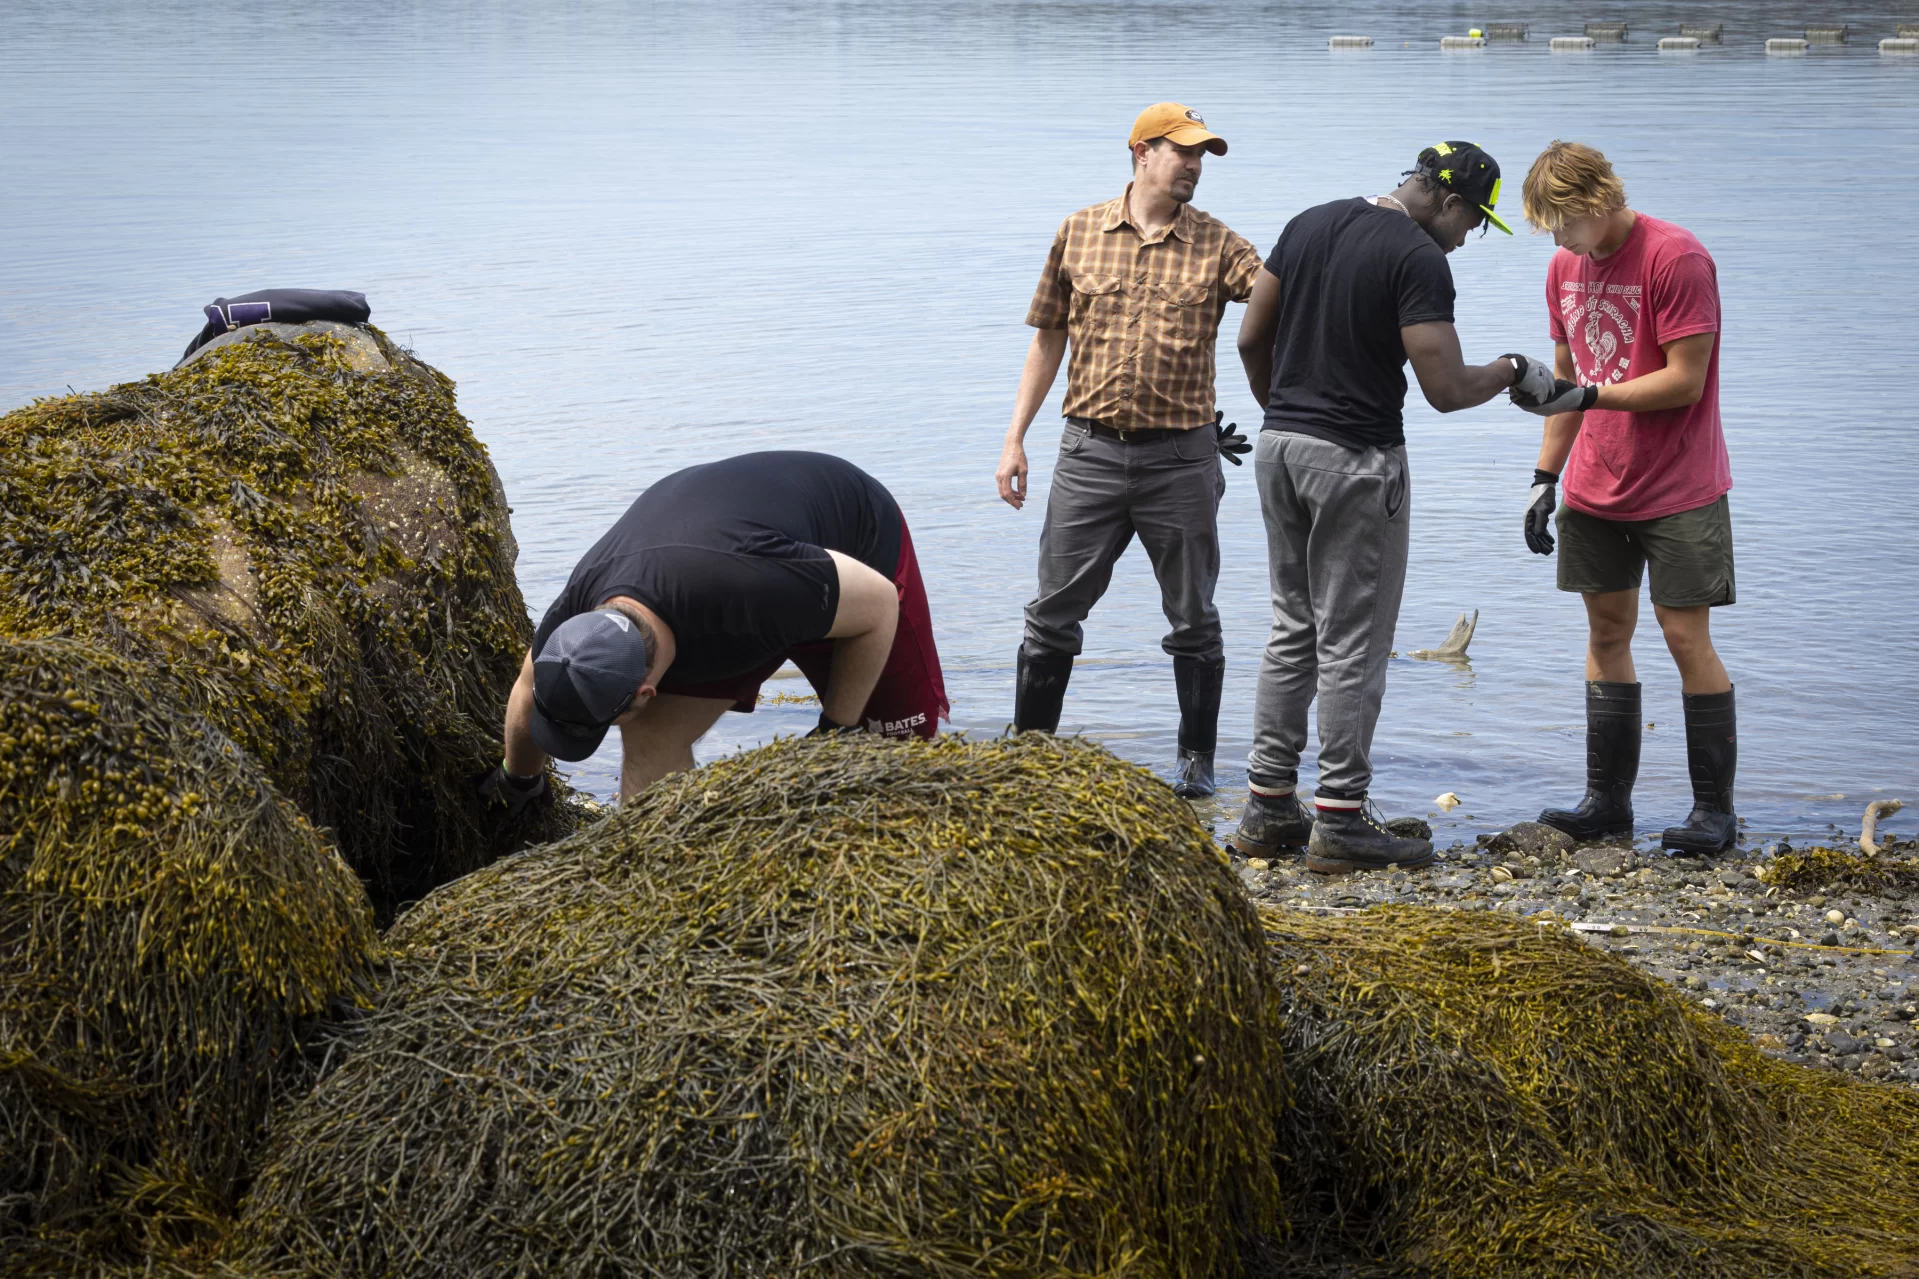 Lecturer in Biology Jesse Minor ’00 takes students in his Short Term on invasive green crabs to Cousins Island in Yarmouth for inventory monitoring and site assessment field trip.

Jessie Batchelder from Manomet joined them.